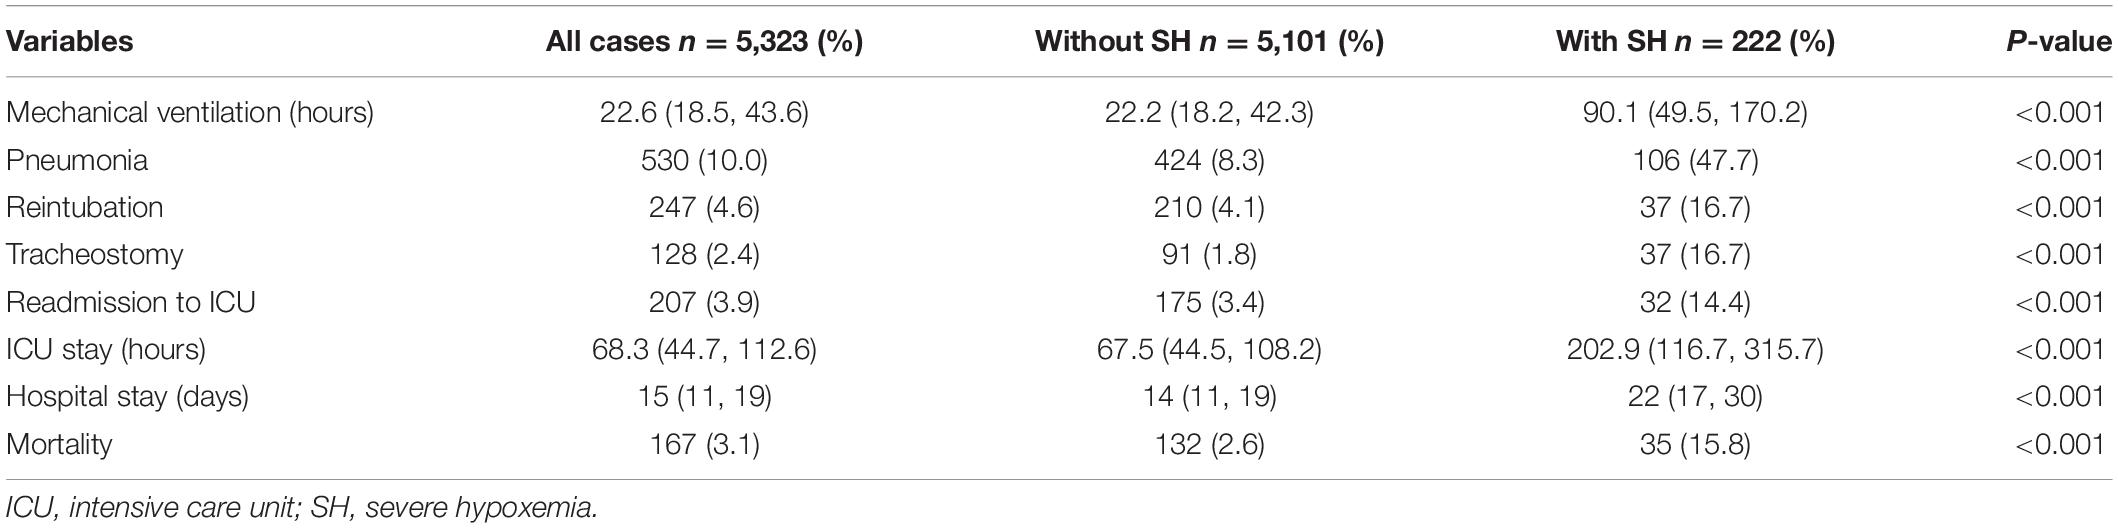 Frontiers Incidence Risk Factors And Outcomes Of Severe Hypoxemia